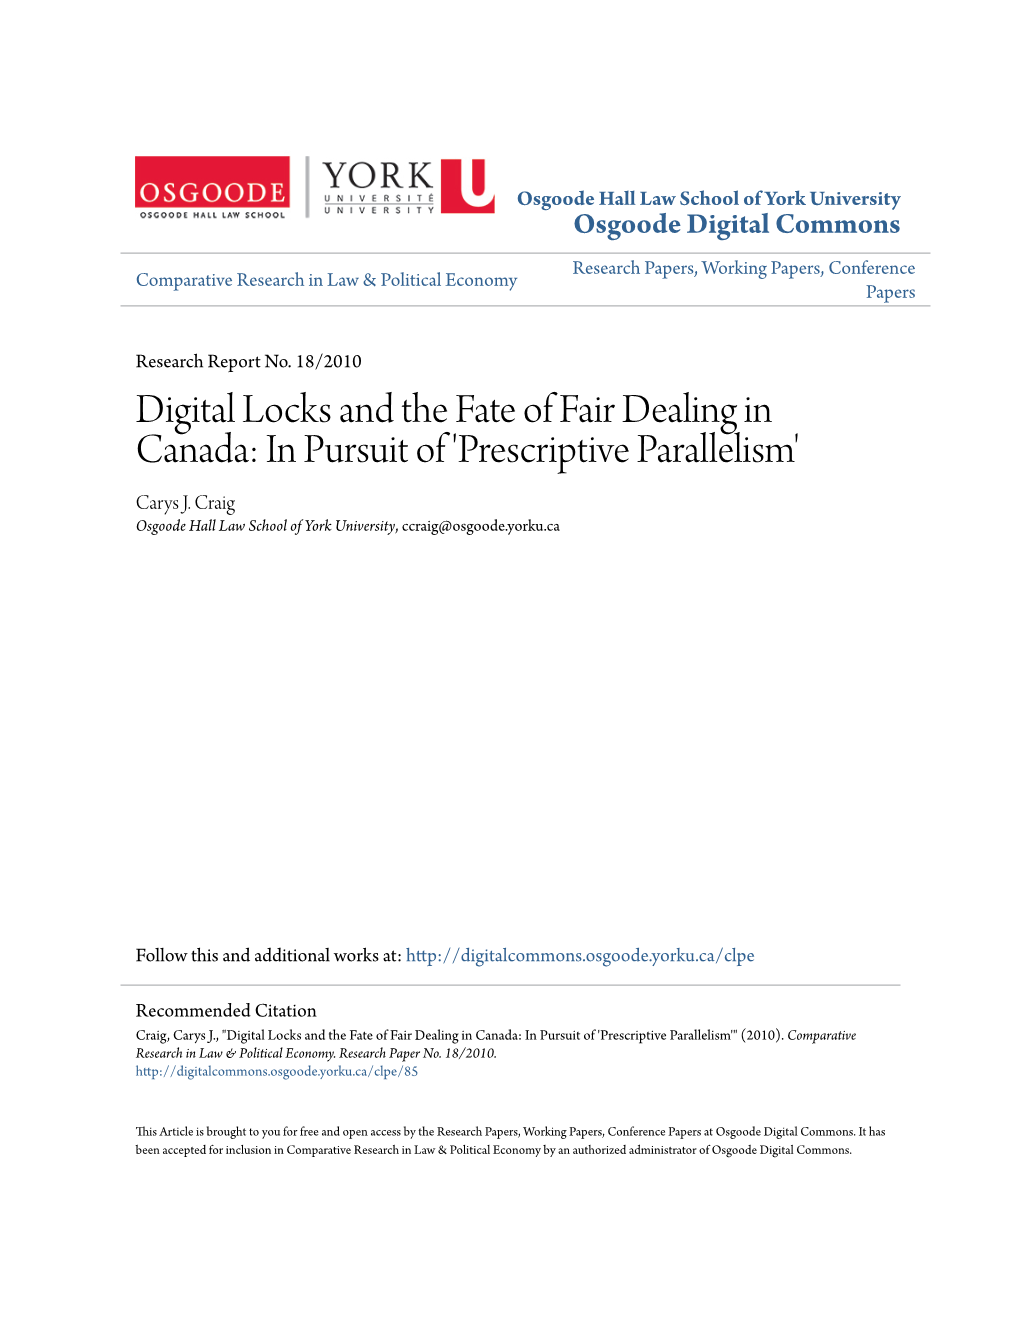 Digital Locks and the Fate of Fair Dealing in Canada: in Pursuit of 'Prescriptive Parallelism' Carys J